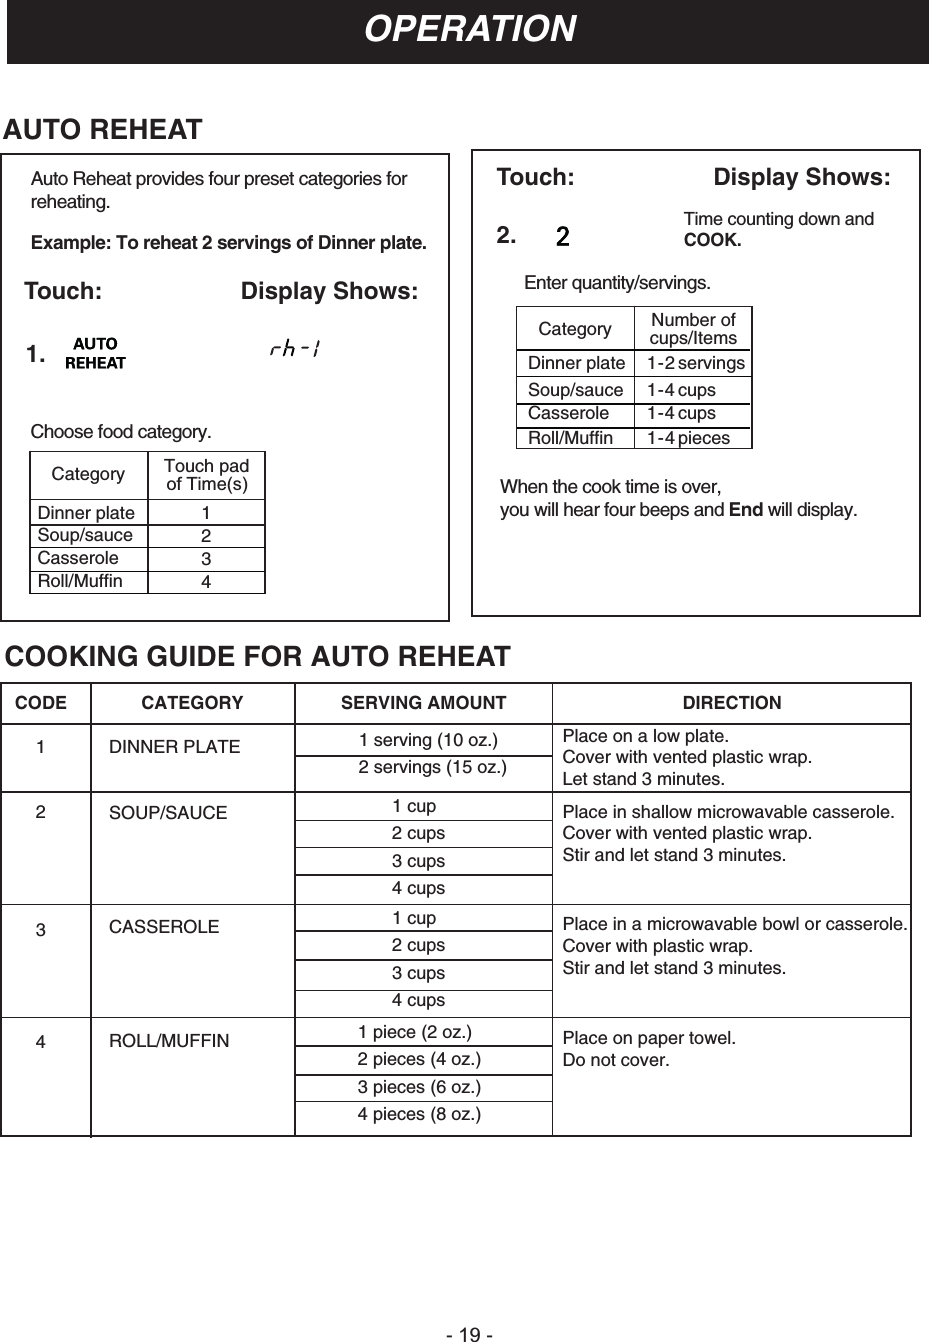 OPERATIONAUTO REHEATAuto Reheat provides four preset categories for Touch: Display Shows:2. Time counting down andCOOK.Enter quantity/servings.When the cook time is over, you will hear four beeps and End will display.Number ofCategory cups/ItemsDinner plate 1 - 2 servingsSoup/sauce 1 - 4 cupsCasserole 1 - 4 cupsRoll/Muffin 1 - 4 piecesreheating.Example: To reheat 2 servings of Dinner plate.Touch: Display Shows:1.COOKING GUIDE FOR AUTO REHEATChoose food category.Touch padCategory of Time(s)Dinner plate 1 Soup/sauce 2Casserole 3Roll/Muffin 4CODE CATEGORY SERVING AMOUNT DIRECTION1 serving (10 oz.) Place on a low plate. 1DINNER PLATE Cover with vented plastic wrap. 2 servings (15 oz.) Let stand 3 minutes.1 cup 2SOUP/SAUCE Place in shallow microwavable casserole.2 cups  Cover with vented plastic wrap. Stir and let stand 3 minutes.3 cups 4 cups 1 cup 3CASSEROLE Place in a microwavable bowl or casserole.2 cups  Cover with plastic wrap.3 cups  Stir and let stand 3 minutes.4 cups 1 piece (2 oz.)4ROLL/MUFFIN Place on paper towel. 2 pieces (4 oz.) Do not cover.3 pieces (6 oz.)4 pieces (8 oz.)-  -